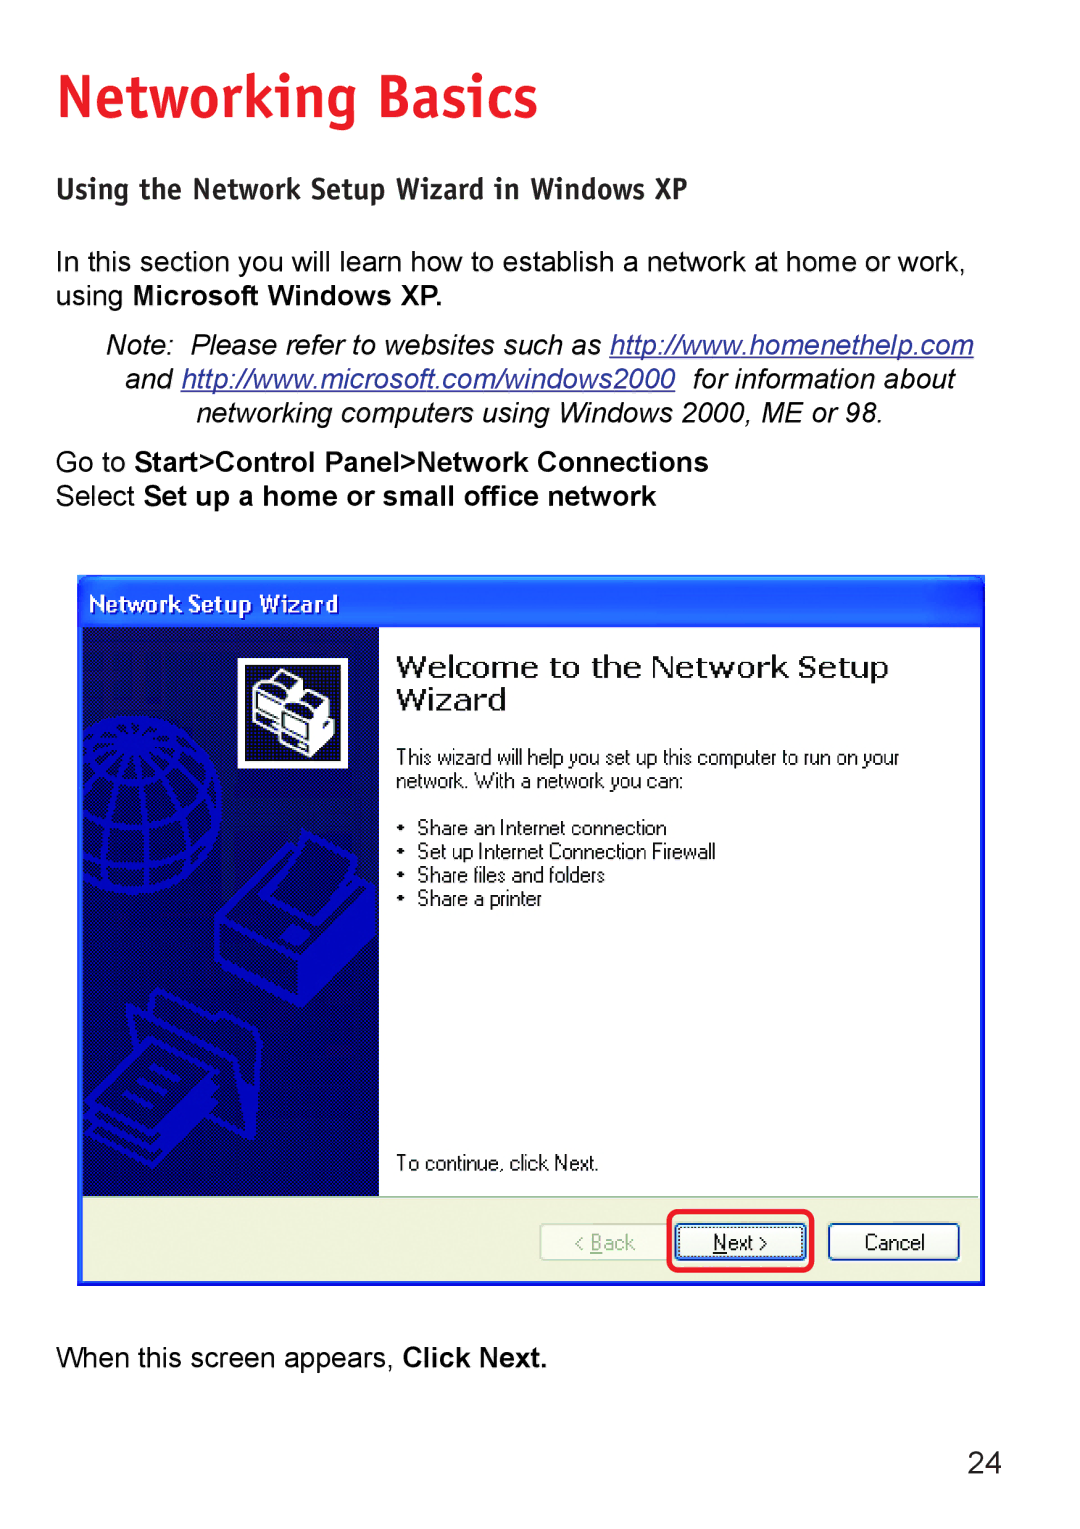 D-Link DWL-6000AP manual Networking Basics, Using the Network Setup Wizard in Windows XP 